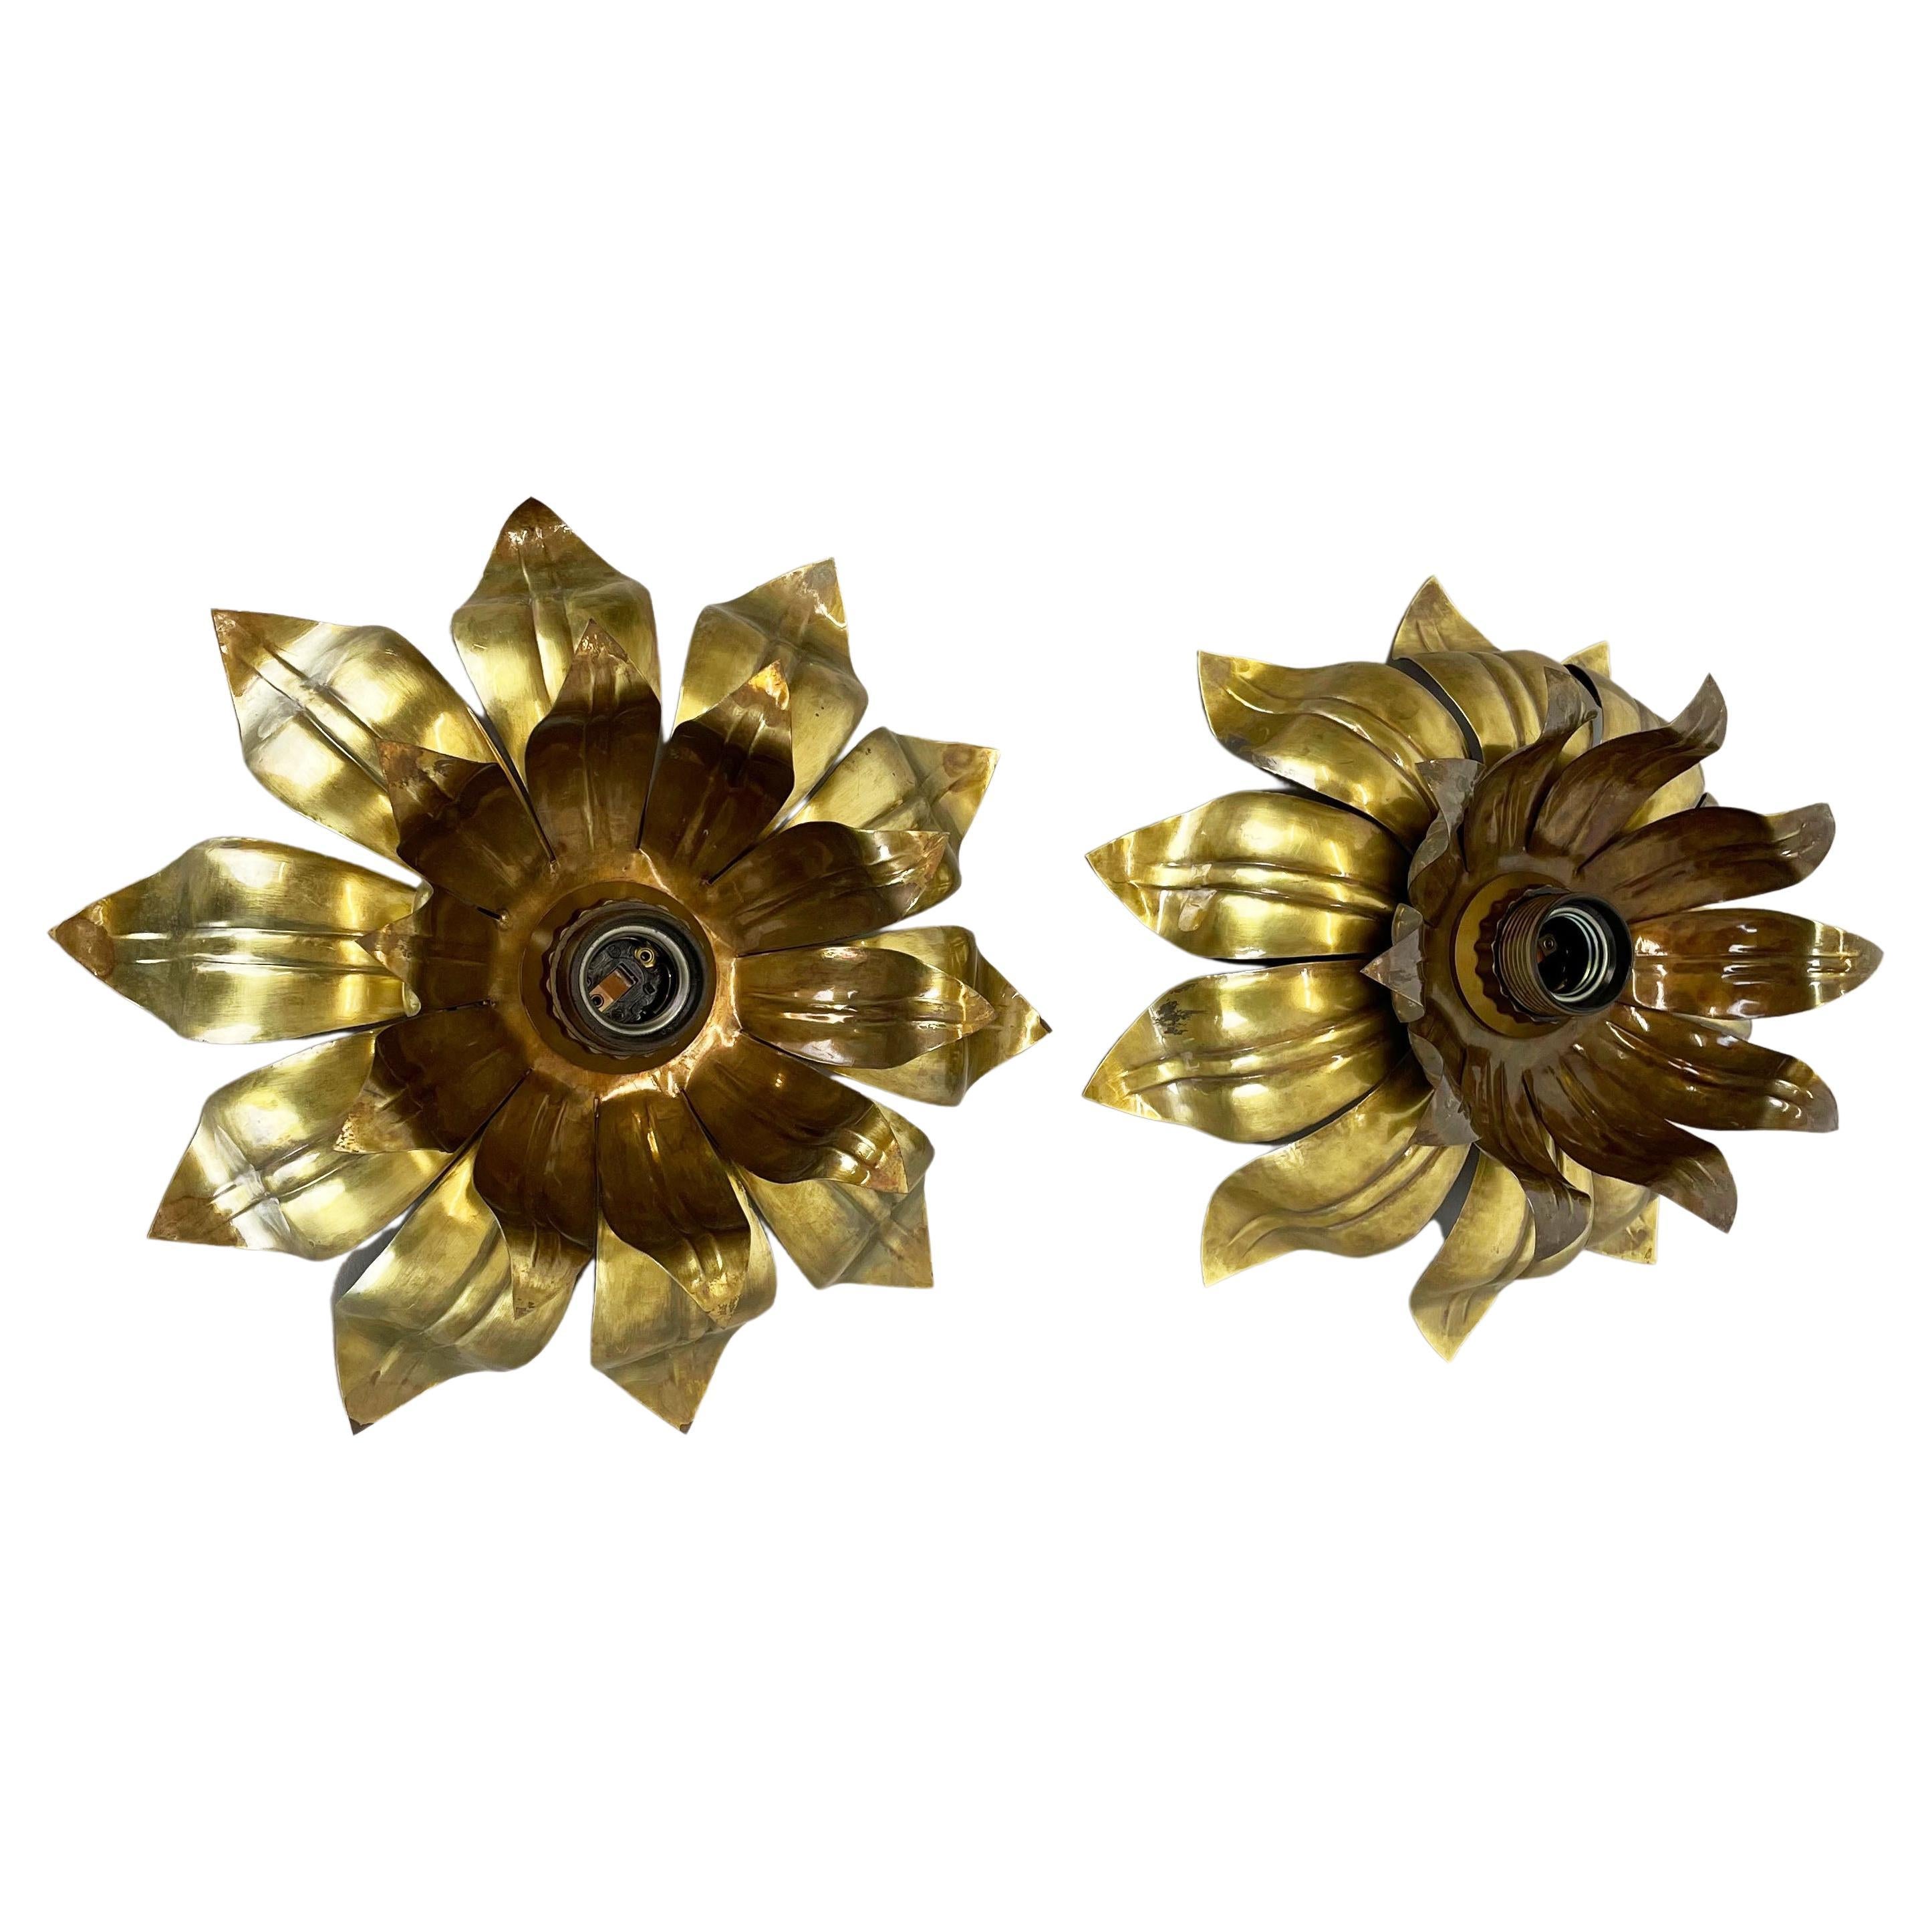 Set of Two Brutalist Brass "Artichoke" Wall Ceiling Light Sconces, Italy 1970s For Sale